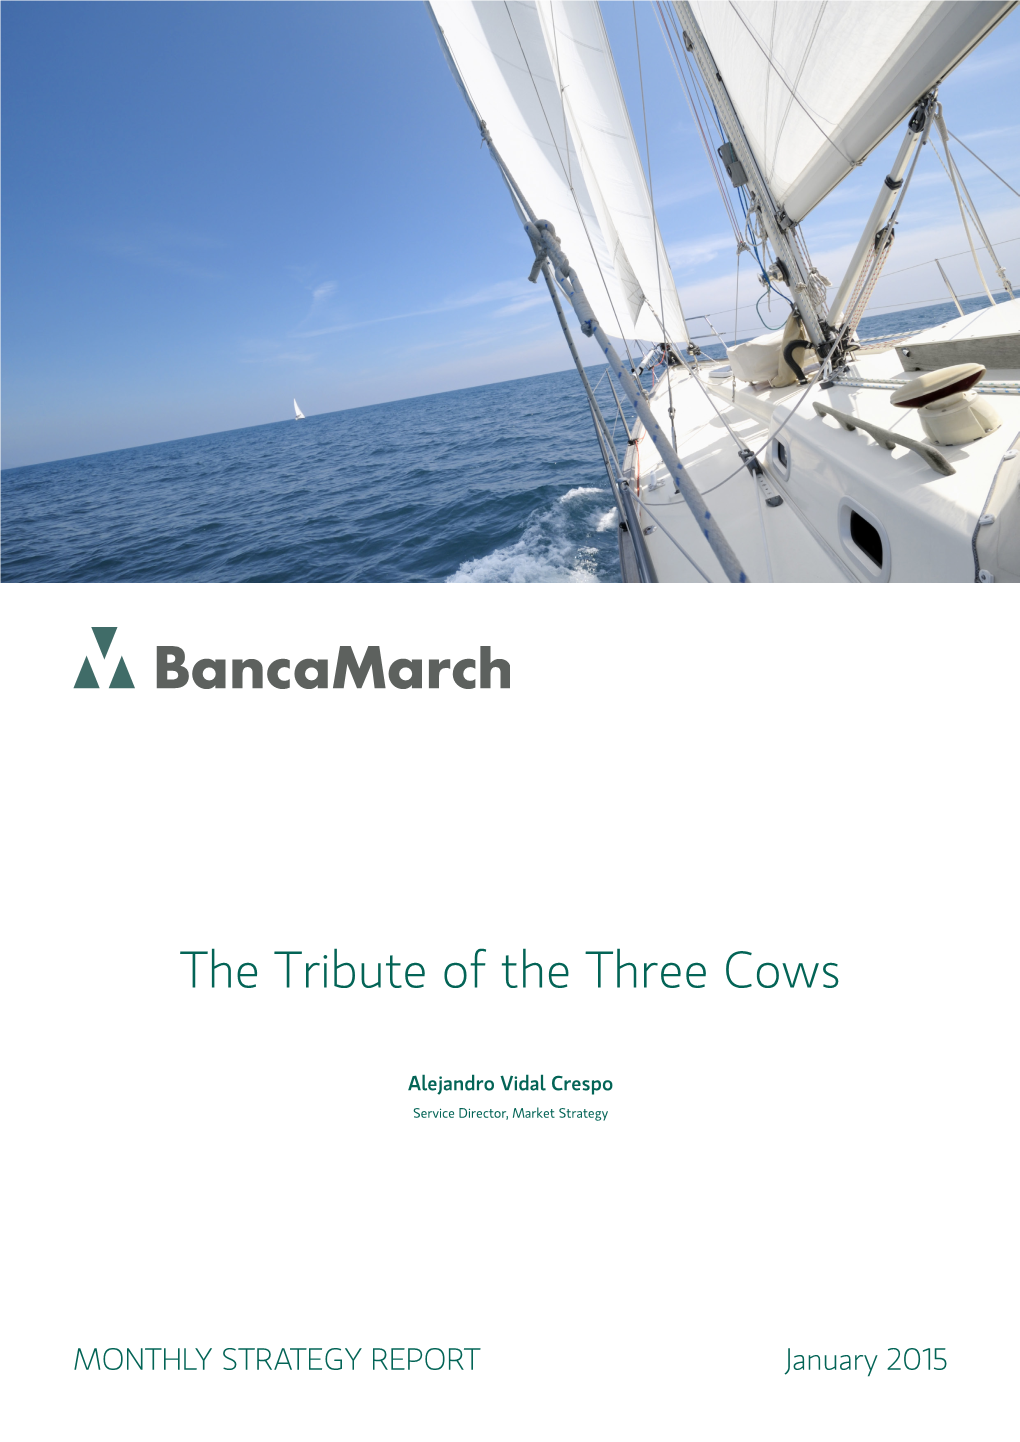 The Tribute of the Three Cows